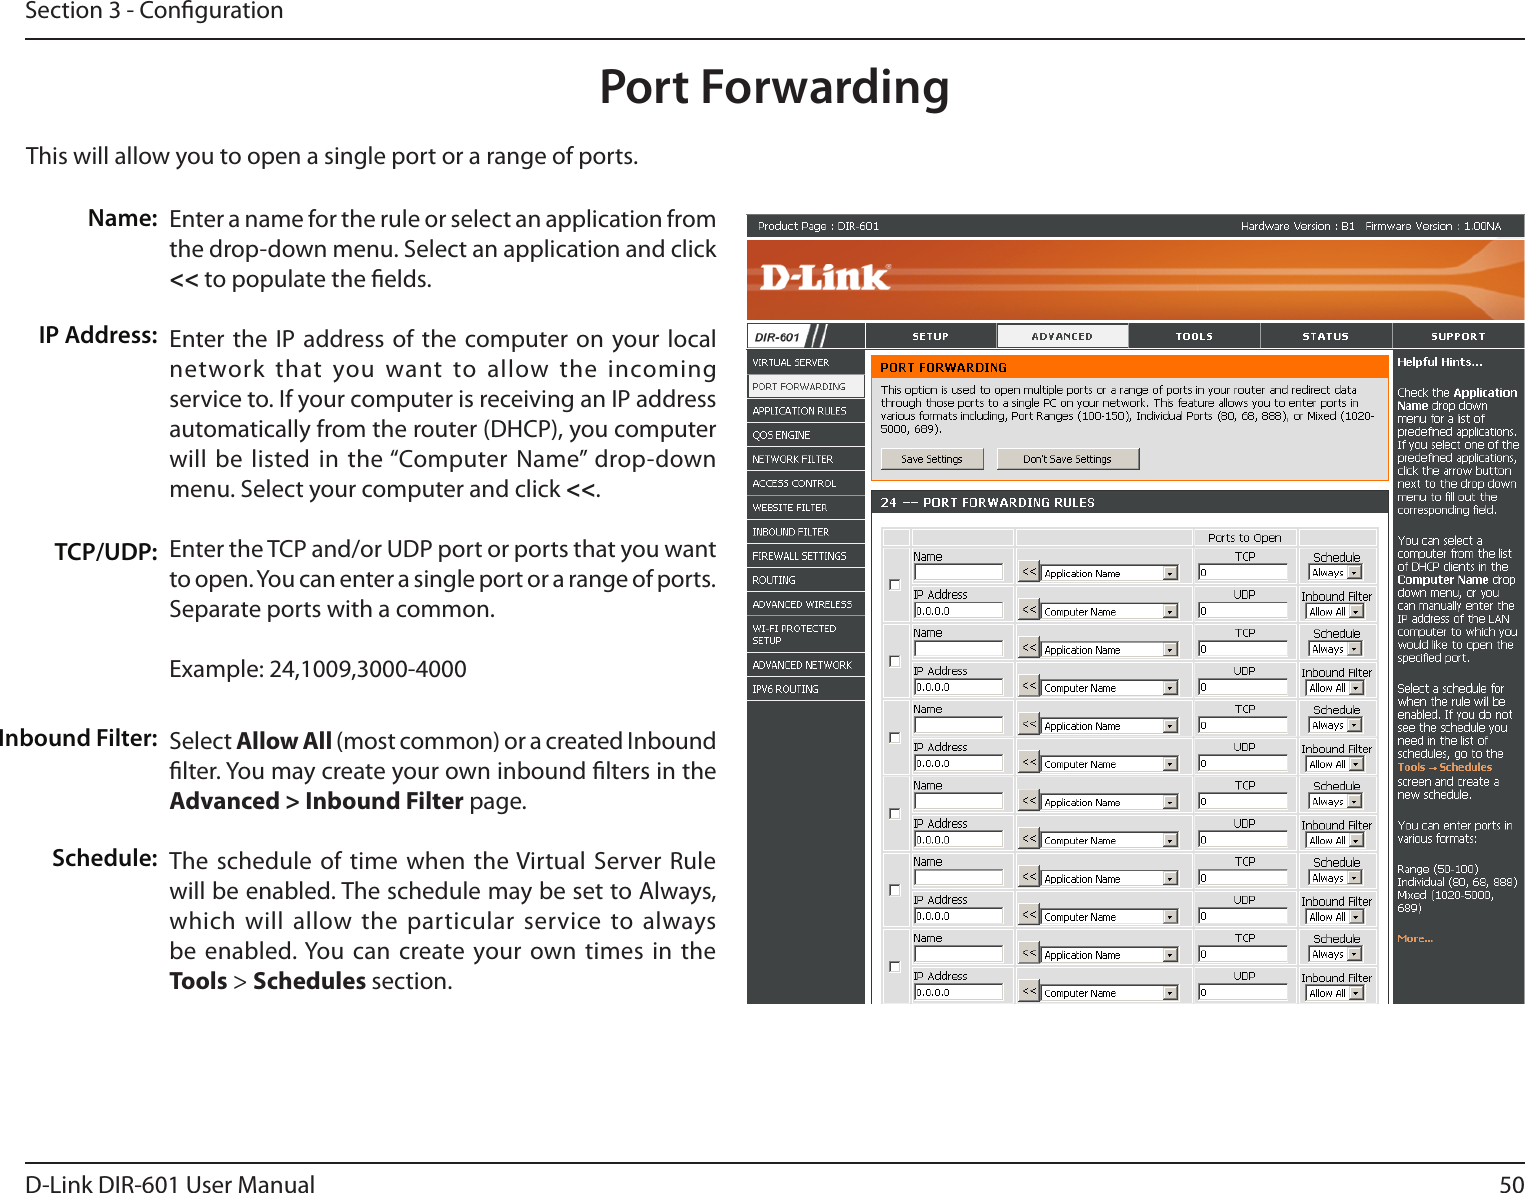 50D-Link DIR-601 User ManualSection 3 - CongurationThis will allow you to open a single port or a range of ports.Port ForwardingEnter a name for the rule or select an application from the drop-down menu. Select an application and click &lt;&lt; to populate the elds.Enter the IP address of the  computer on your local network that you  want to allow  the incoming service to. If your computer is receiving an IP address automatically from the router (DHCP), you computer will be  listed in  the “Computer Name” drop-down menu. Select your computer and click &lt;&lt;. Enter the TCP and/or UDP port or ports that you want to open. You can enter a single port or a range of ports. Separate ports with a common.Example: 24,1009,3000-4000Select Allow All (most common) or a created Inbound lter. You may create your own inbound lters in the Advanced&gt;InboundFilter page.The schedule of time  when the Virtual  Server Rule will be enabled. The schedule may be set to Always, which will  allow the  particular service to always be enabled. You can create your own times  in the  Tools &gt; Schedules section.Name:IP Address:TCP/UDP:Inbound Filter:Schedule: